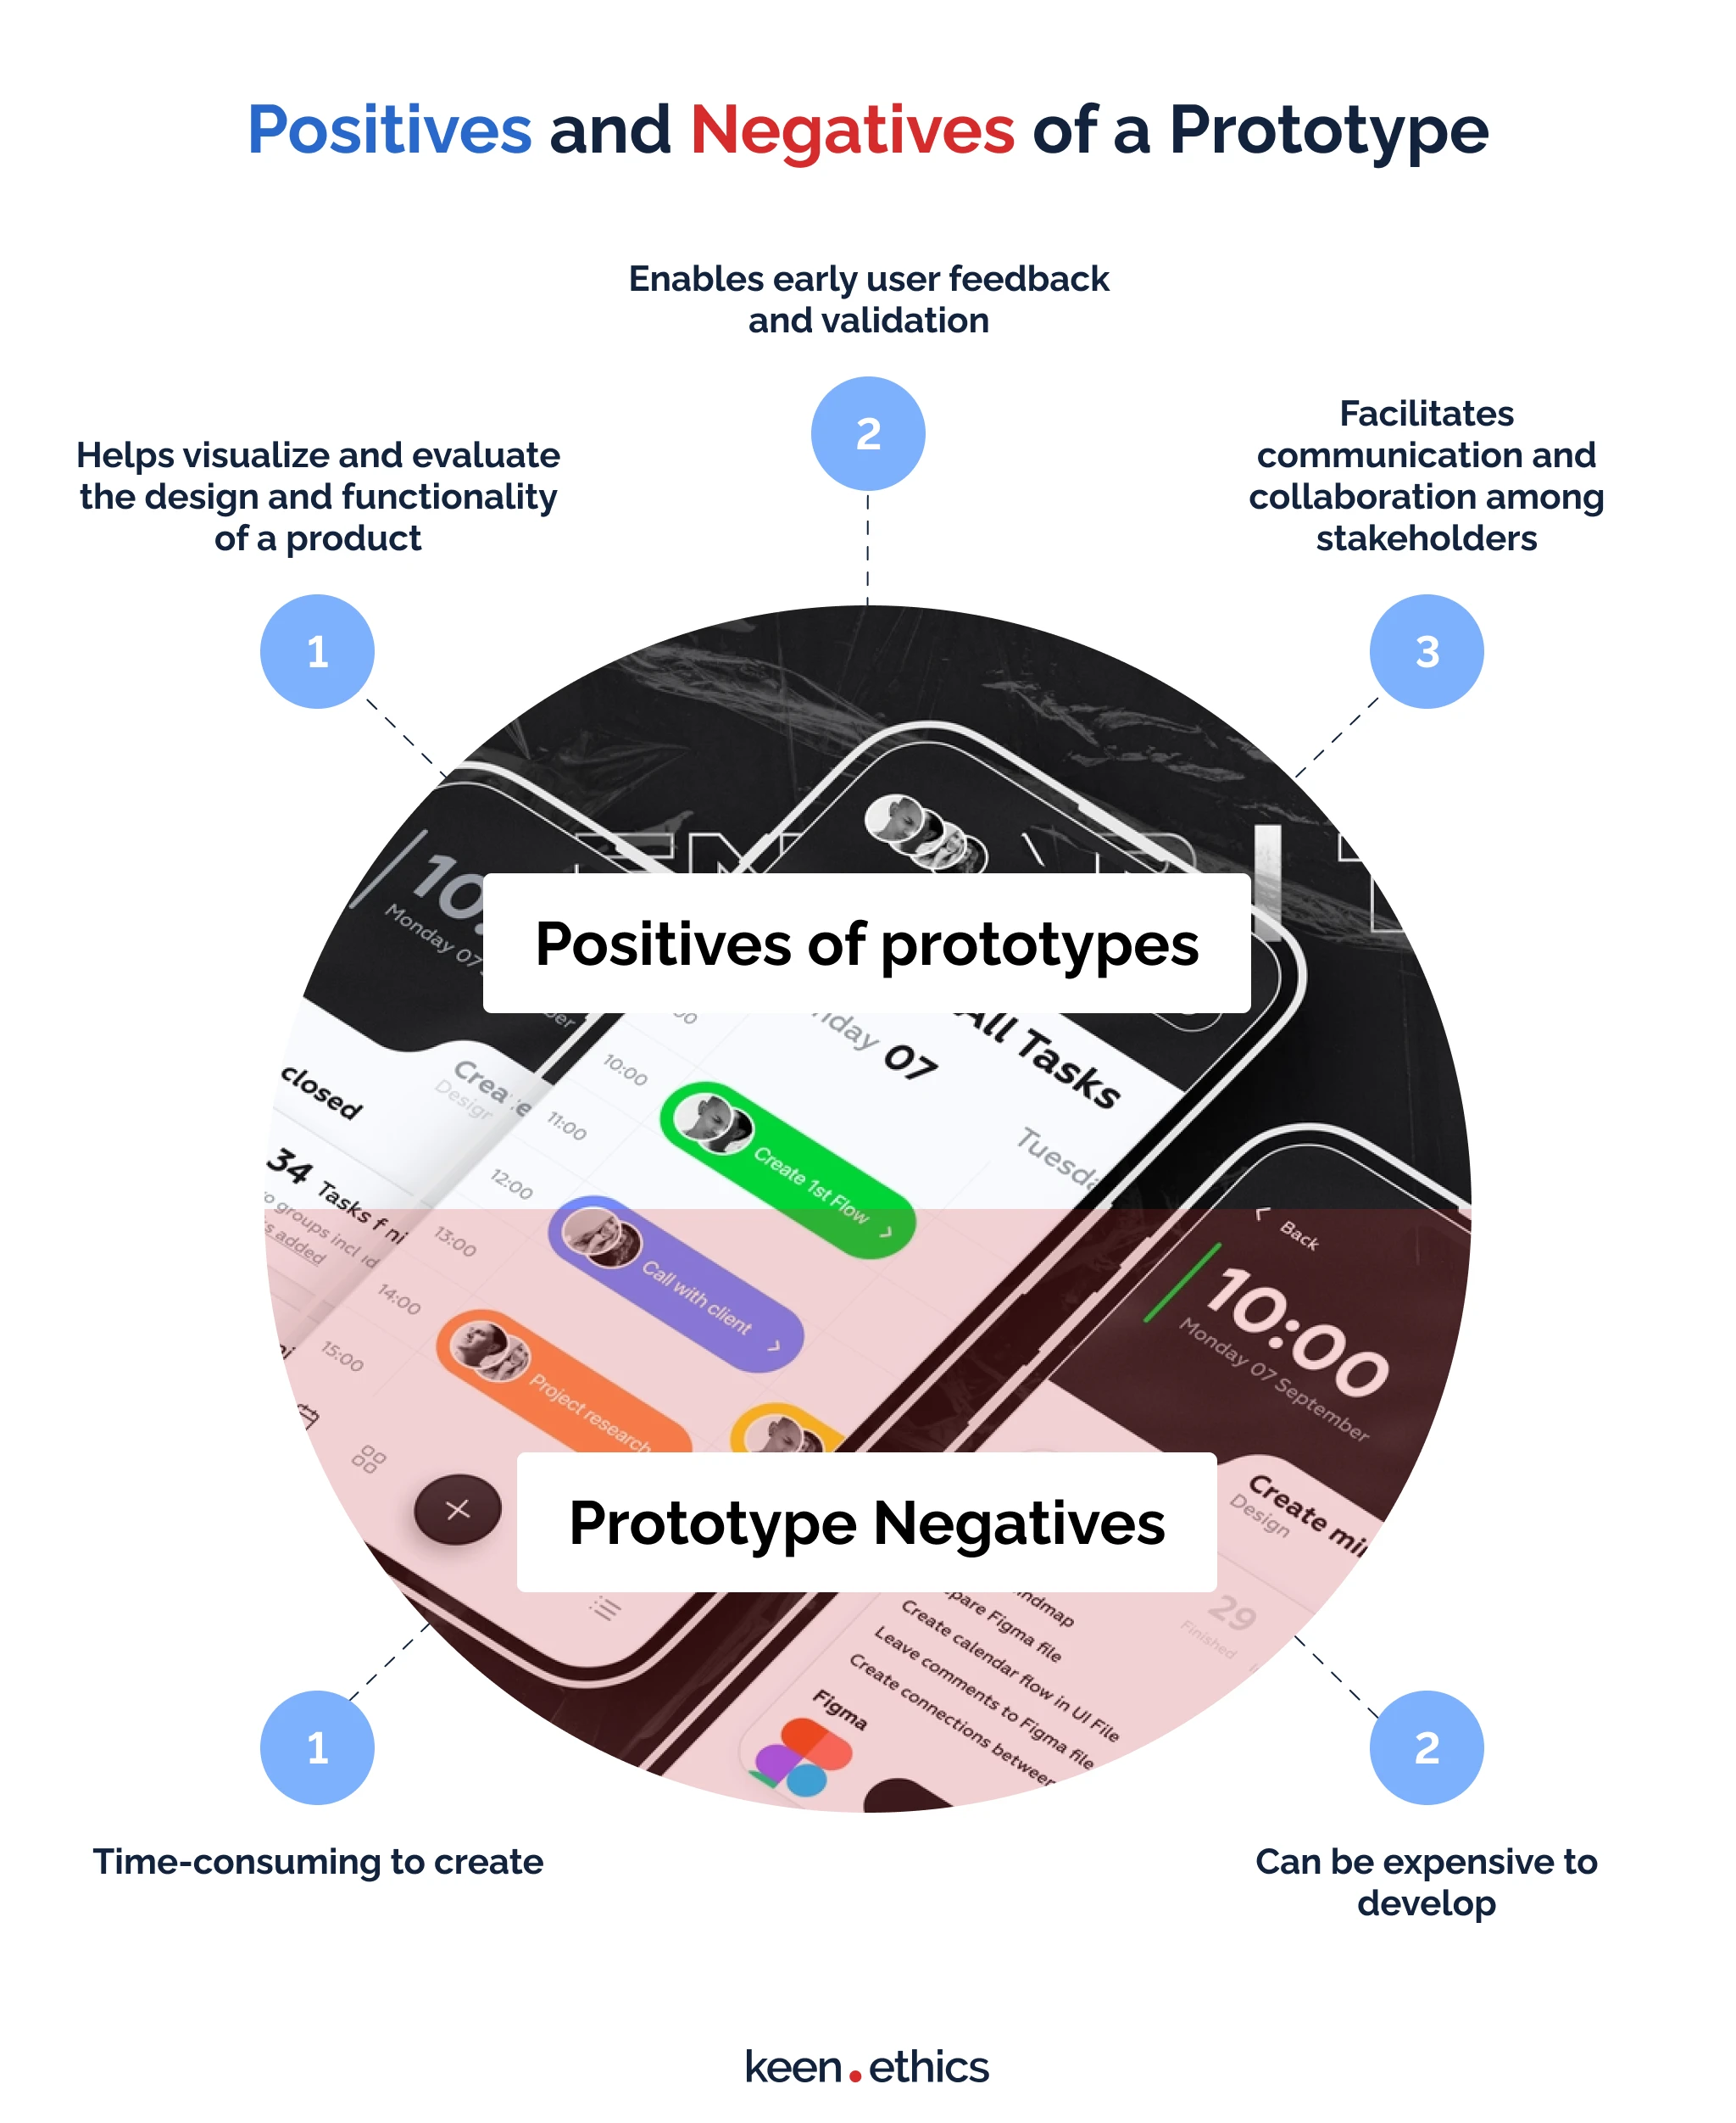 Positives and negatives of a prototype